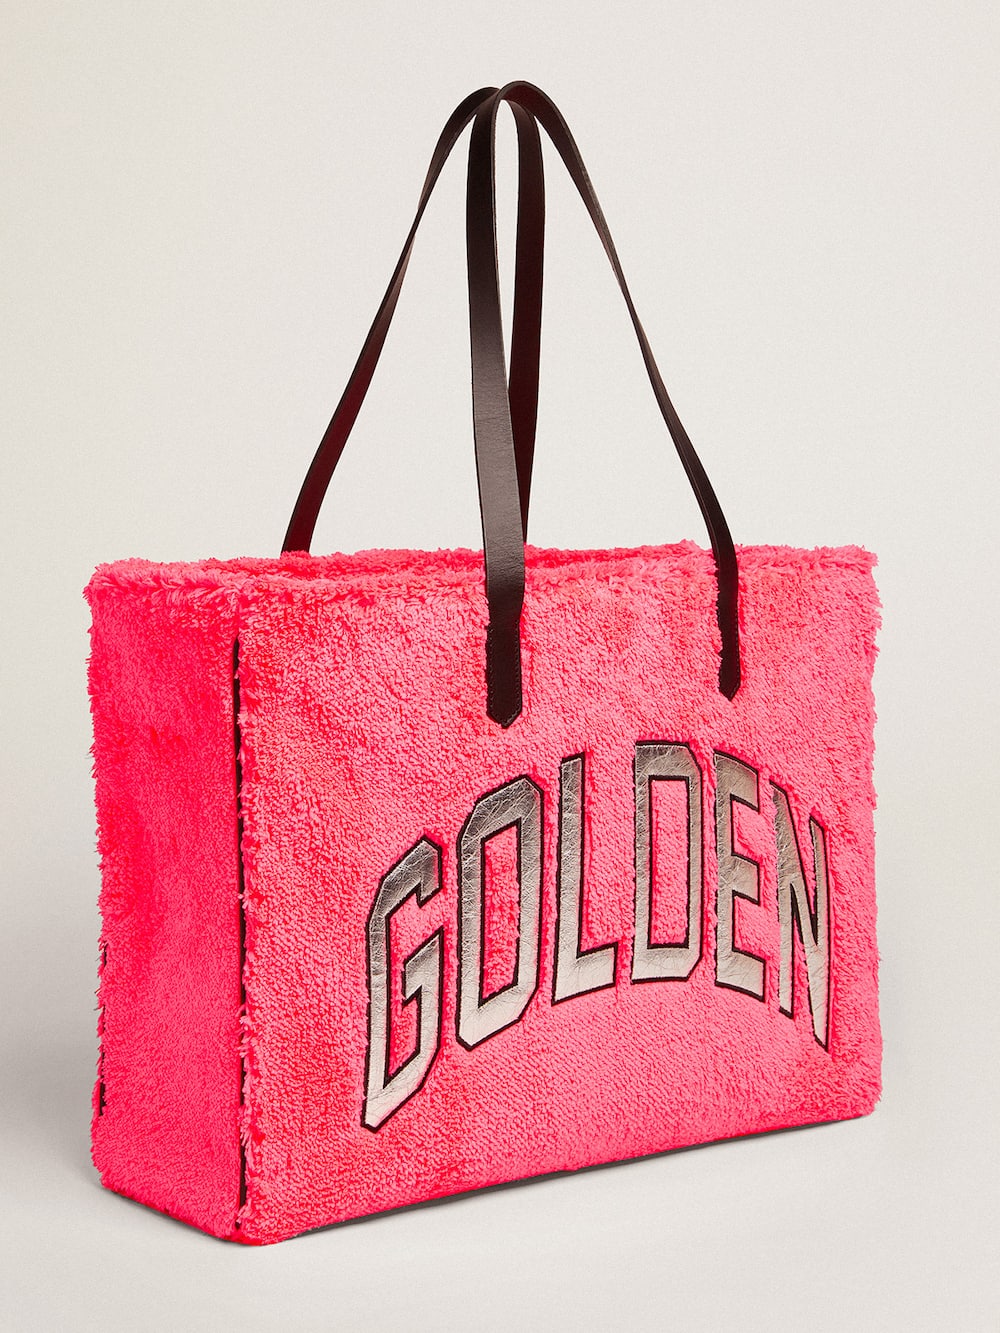 Golden Goose - Women's California Bag East-West in fuchsia terry and silver lettering in 